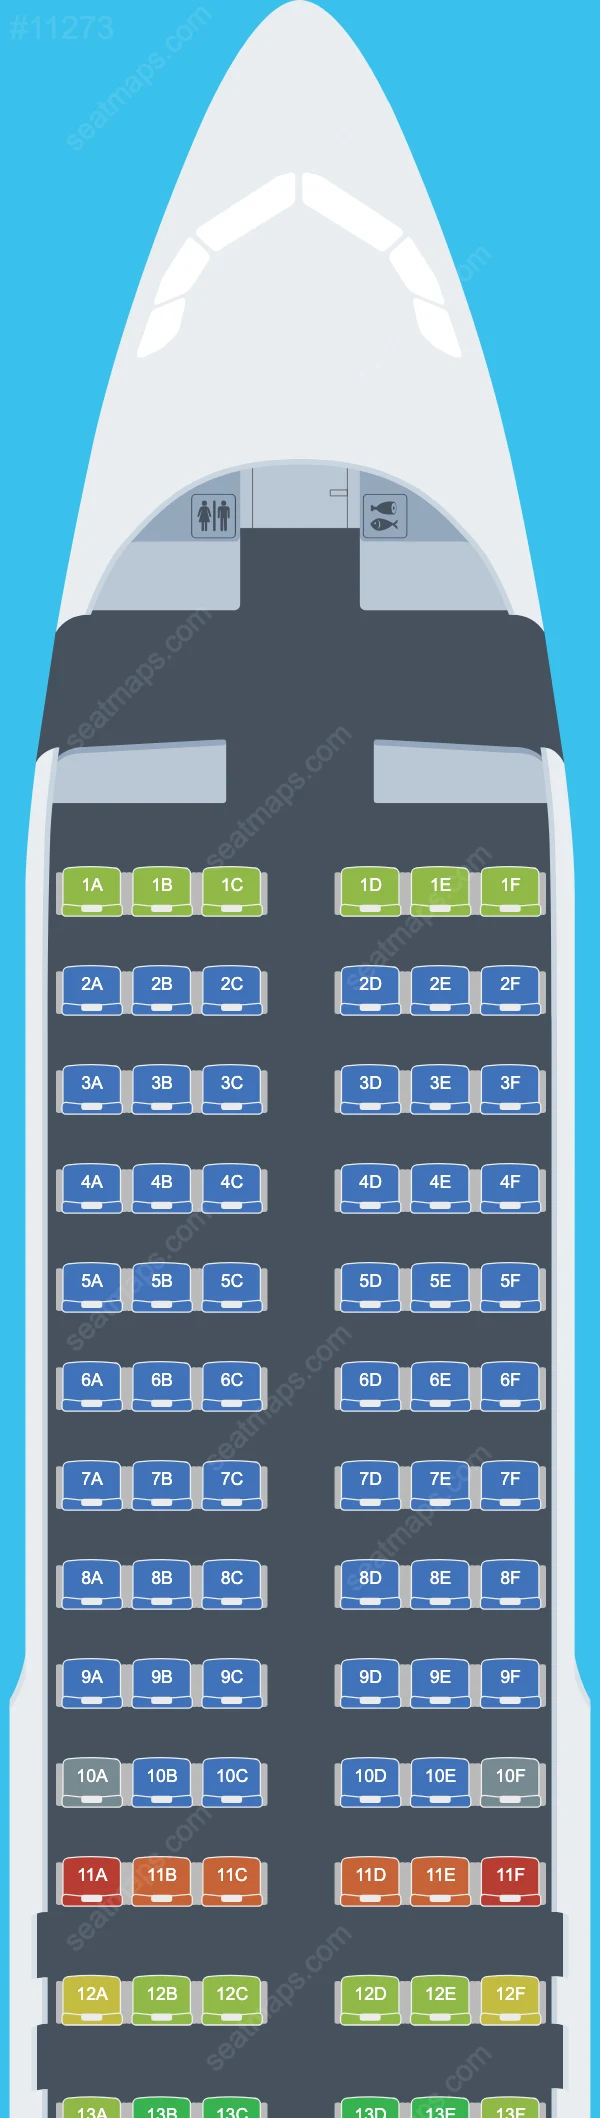 Fly Air41 Airbus A320 aircraft seat map  A320-200